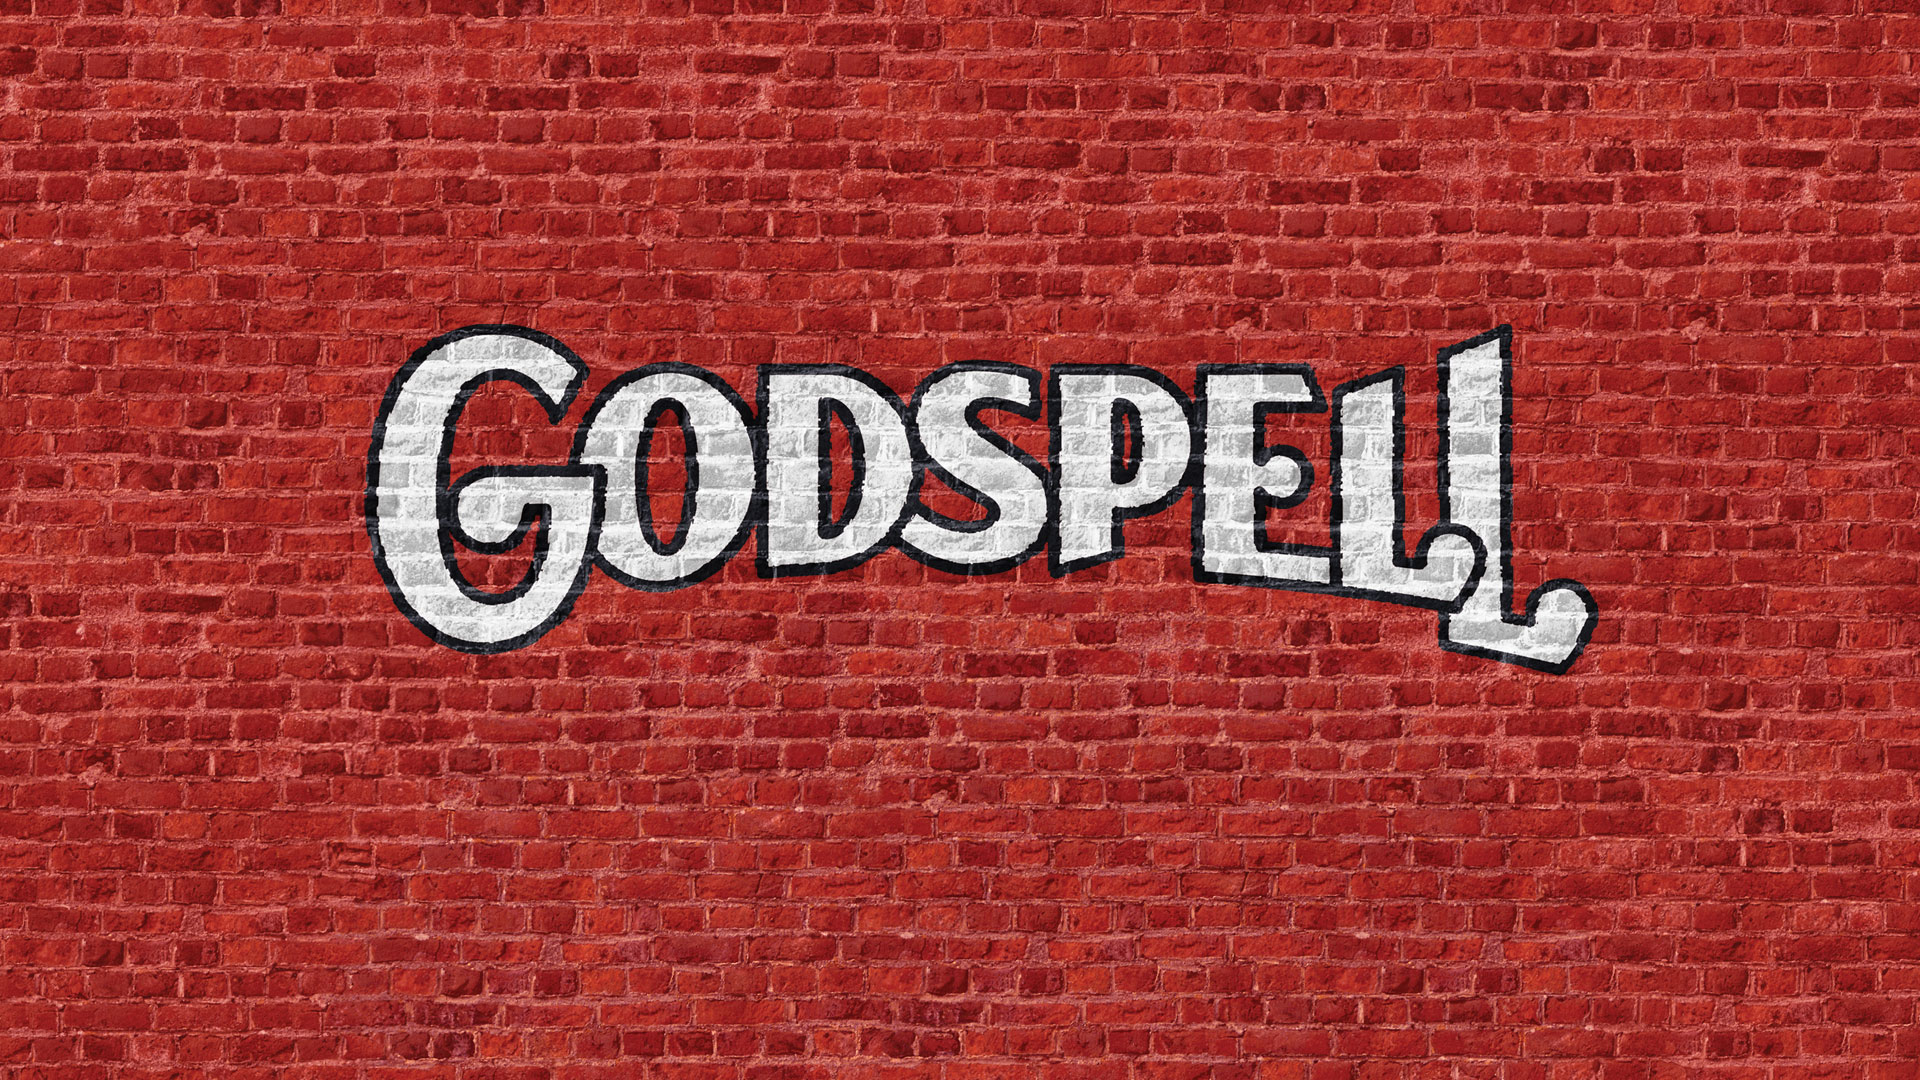 Announcing the cast for Godspell!